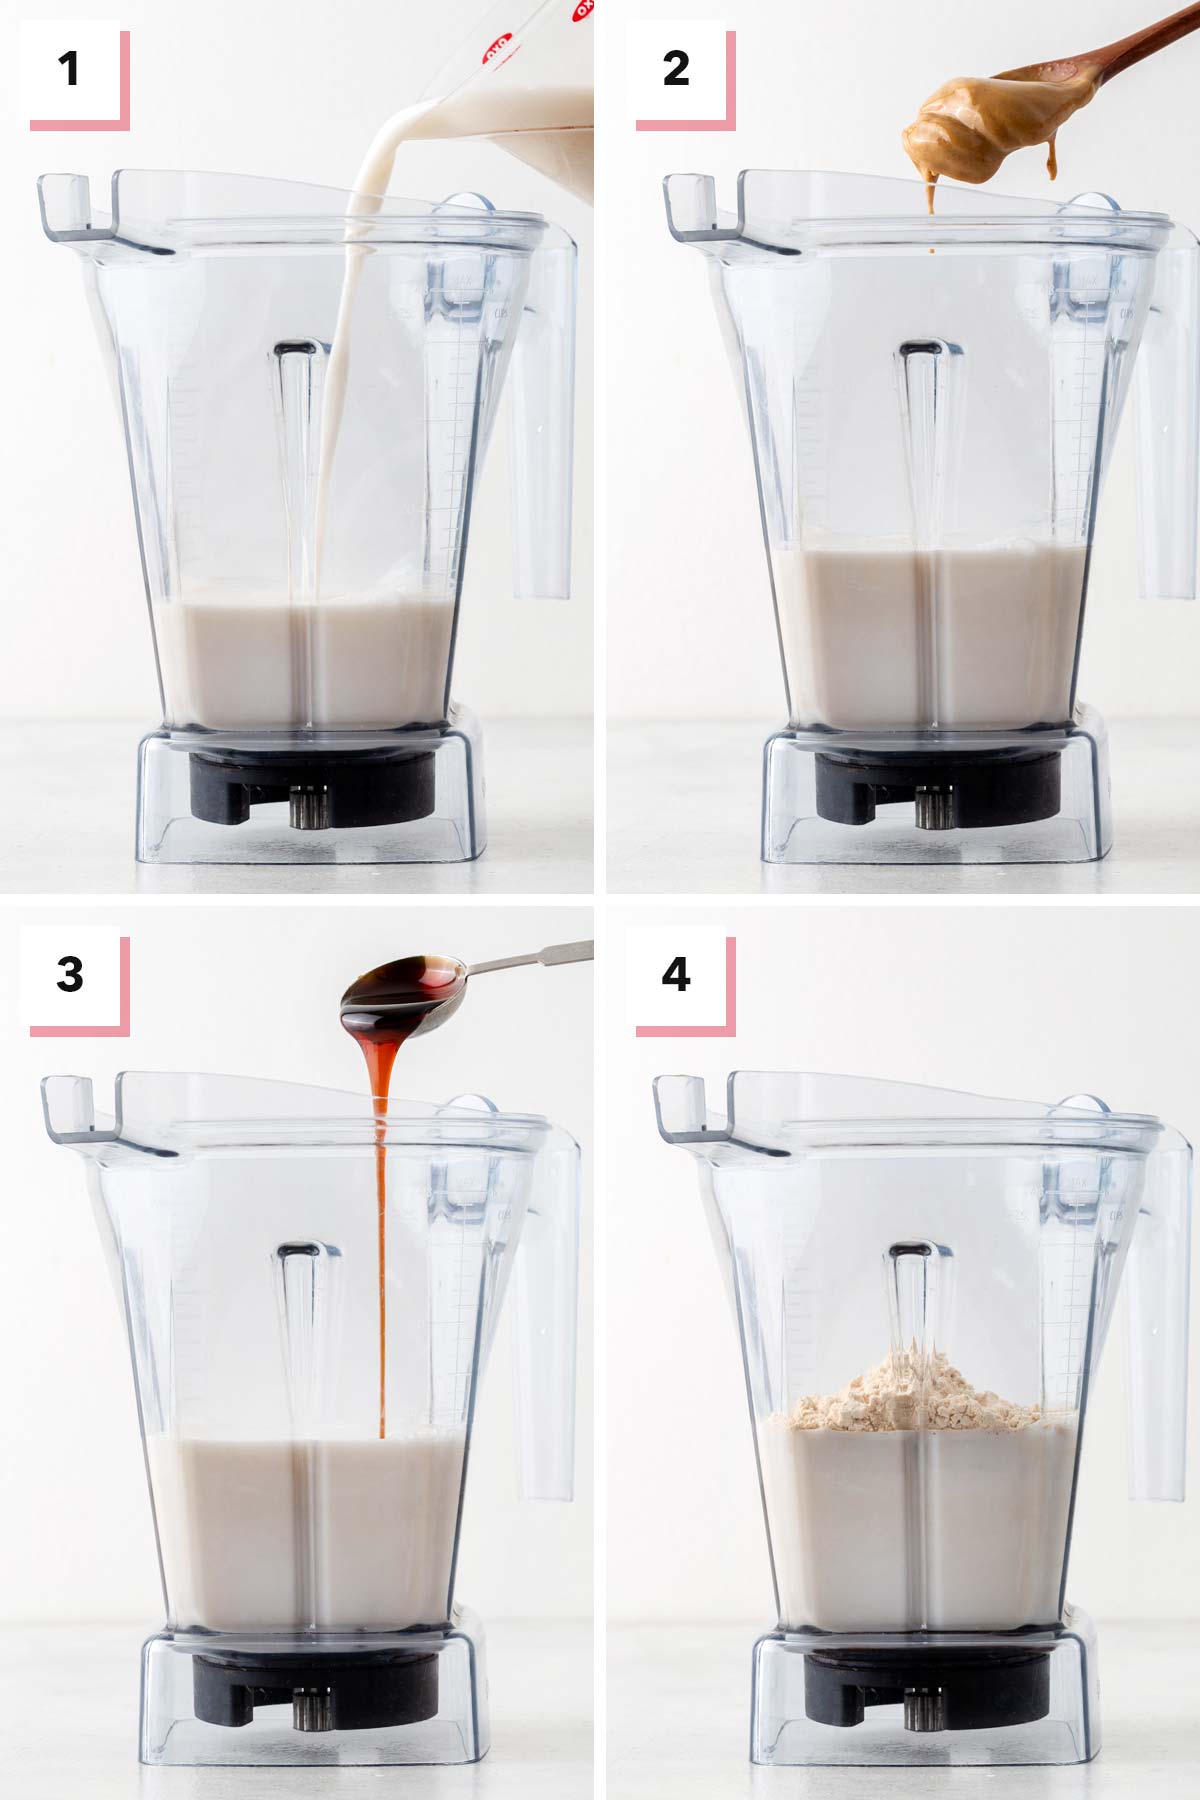 Steps for making a peanut butter protein shake.